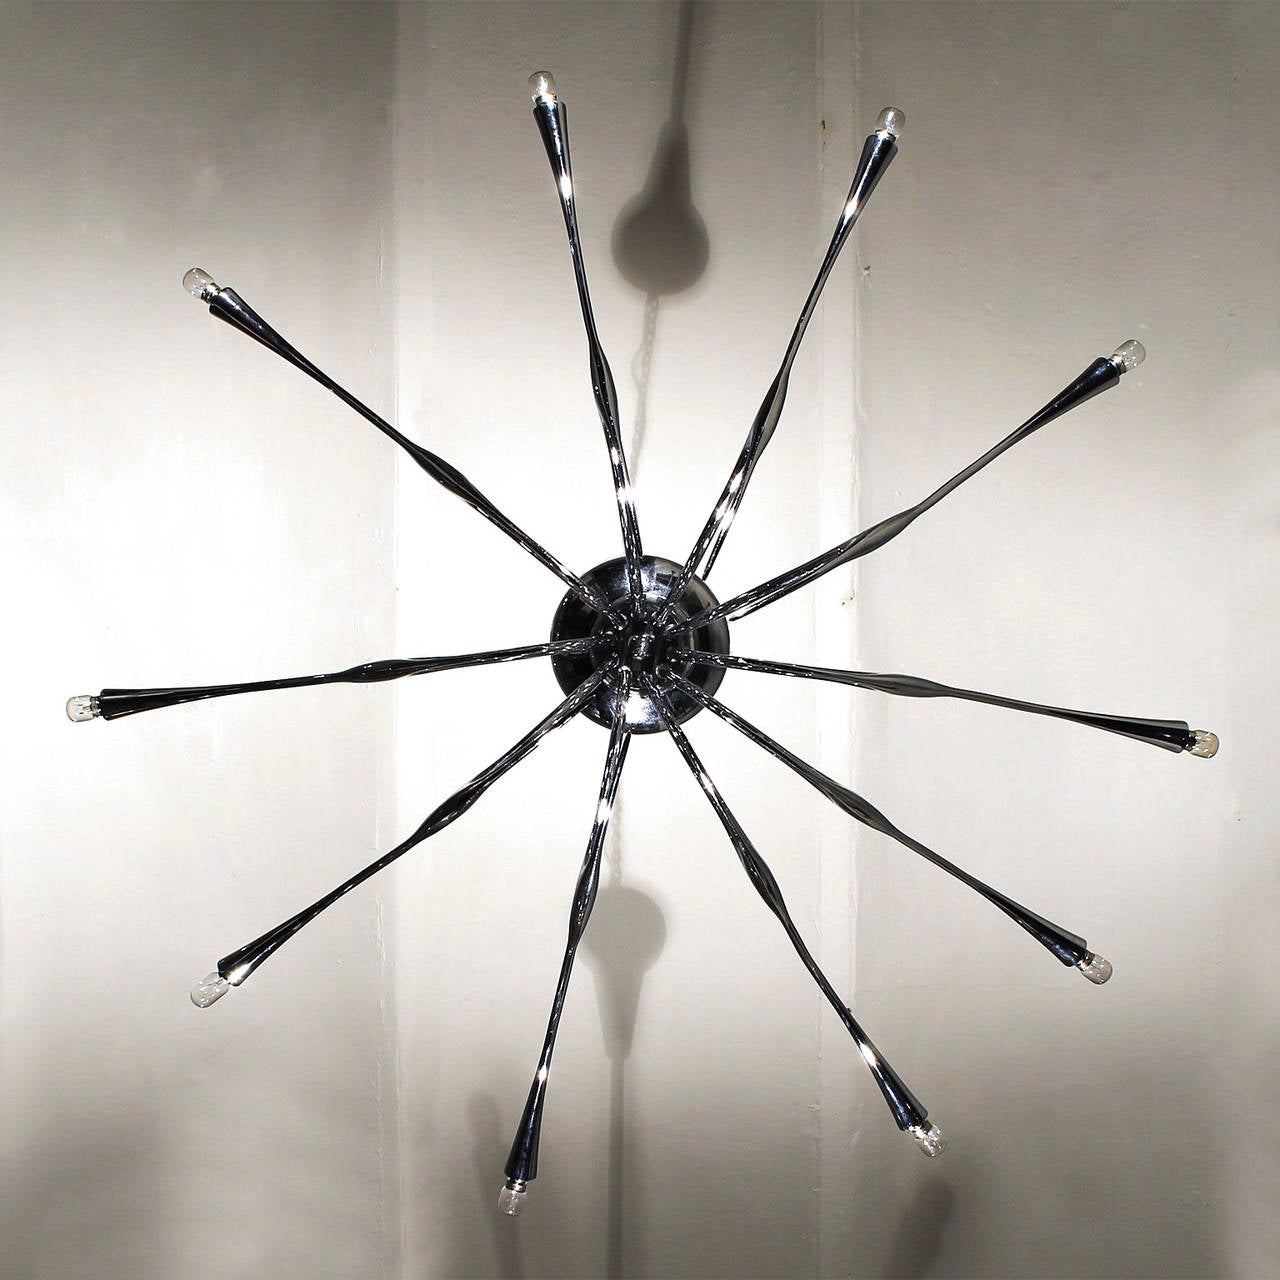 Spectacular 10 lights chandelier, nickel plated brass, rewired.
Design: Oscar Torlasco
Edited: Lumi Roma
Italy 1955

Bibliography: A ceiling lamp by O. Torlasco